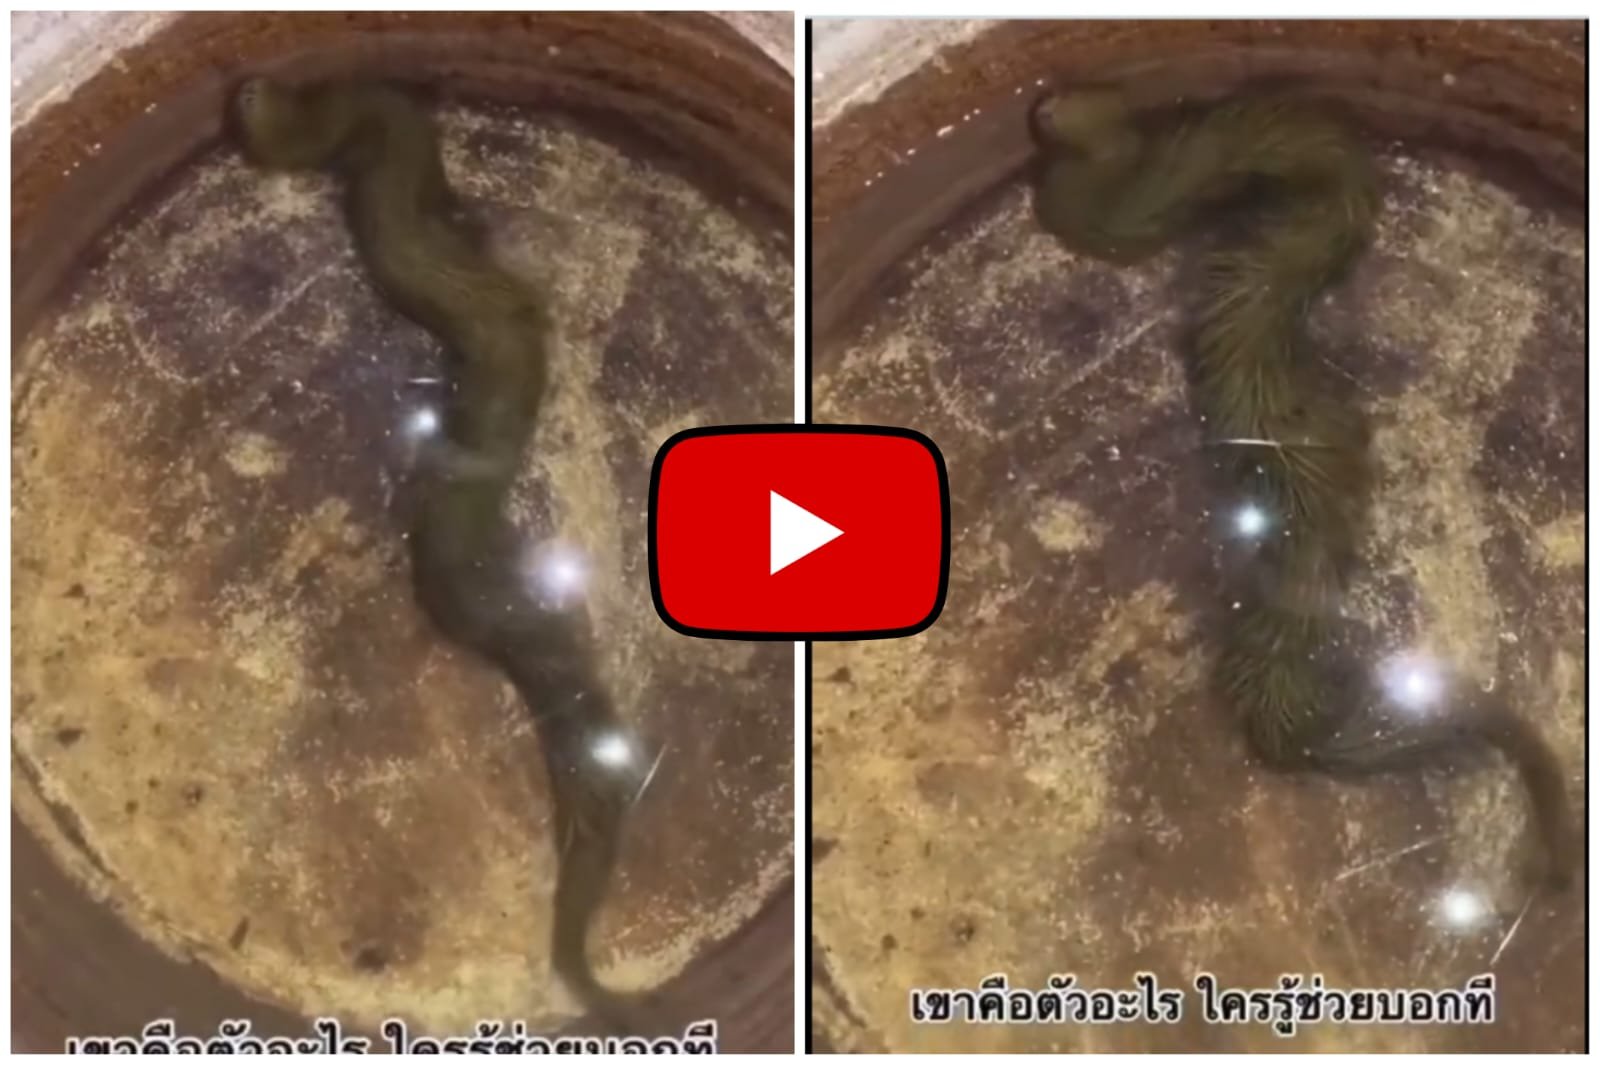 Saanp Ka Video - You will be surprised to see the snake that looks like grass.